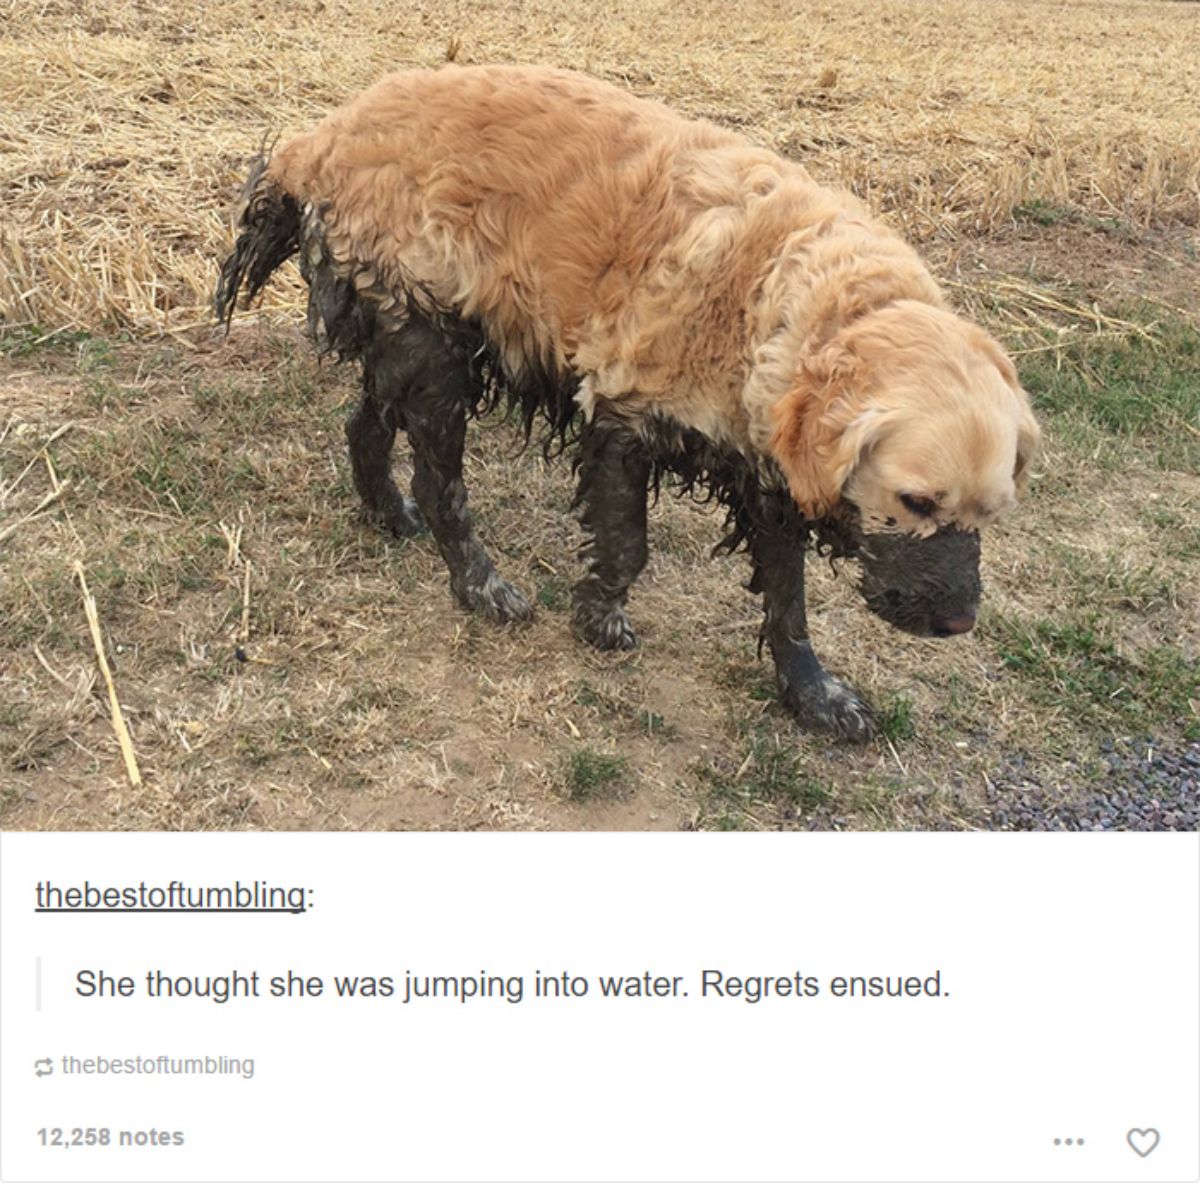 tumblr post of golden retriever looking sad with mud in the bottom half with caption saying she thought she was jumping into water, regrets ensued